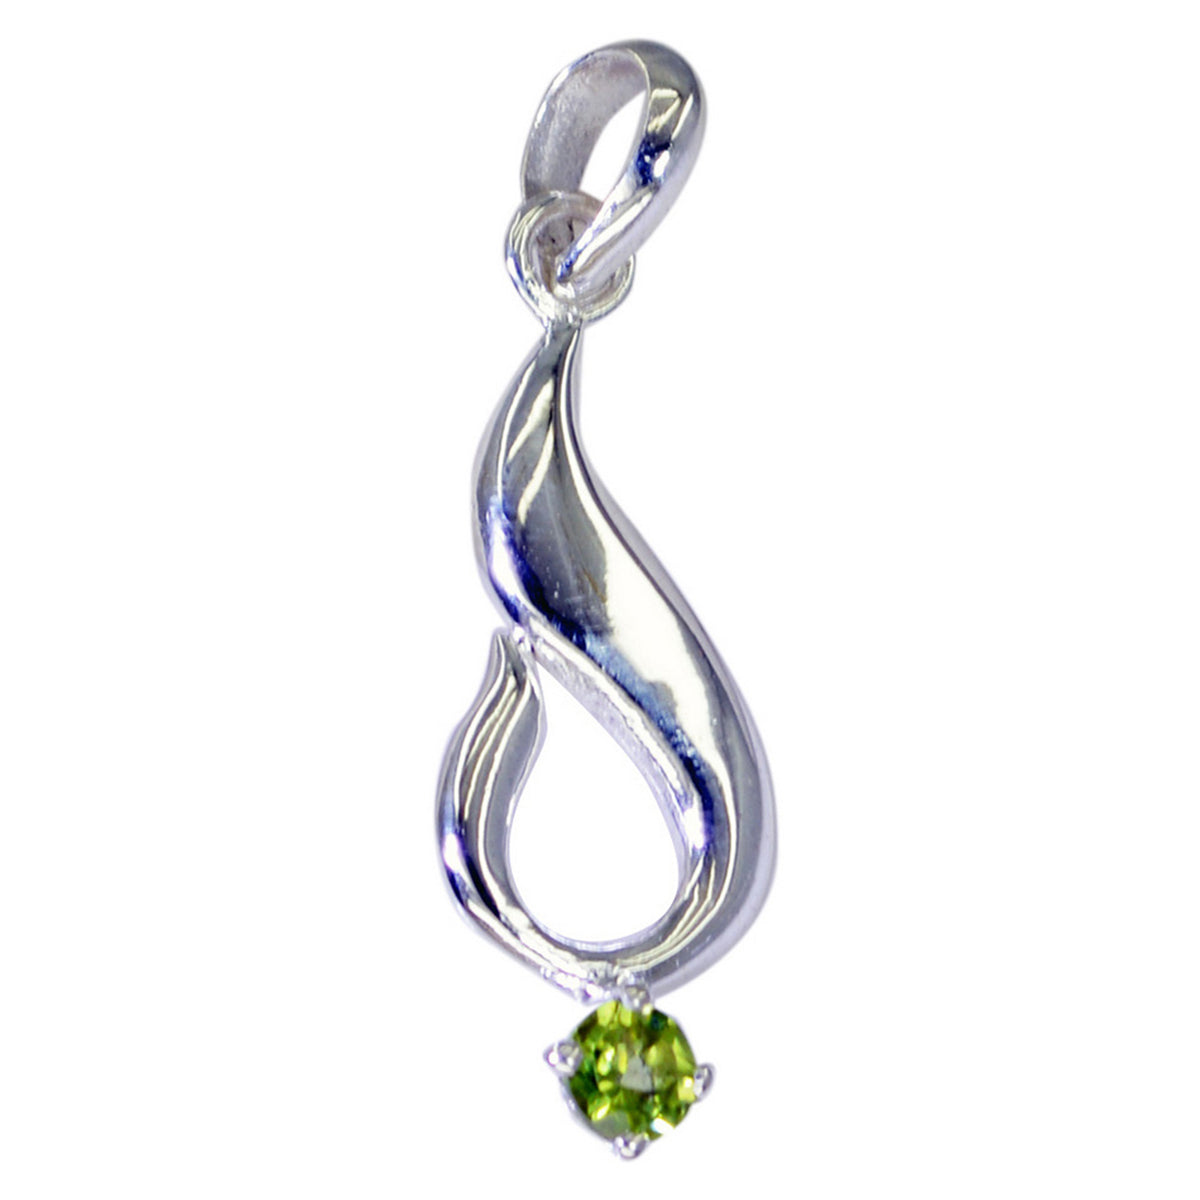 Riyo Genuine Gems Round Faceted Green Peridot Solid Silver Pendant gift for teacher's day